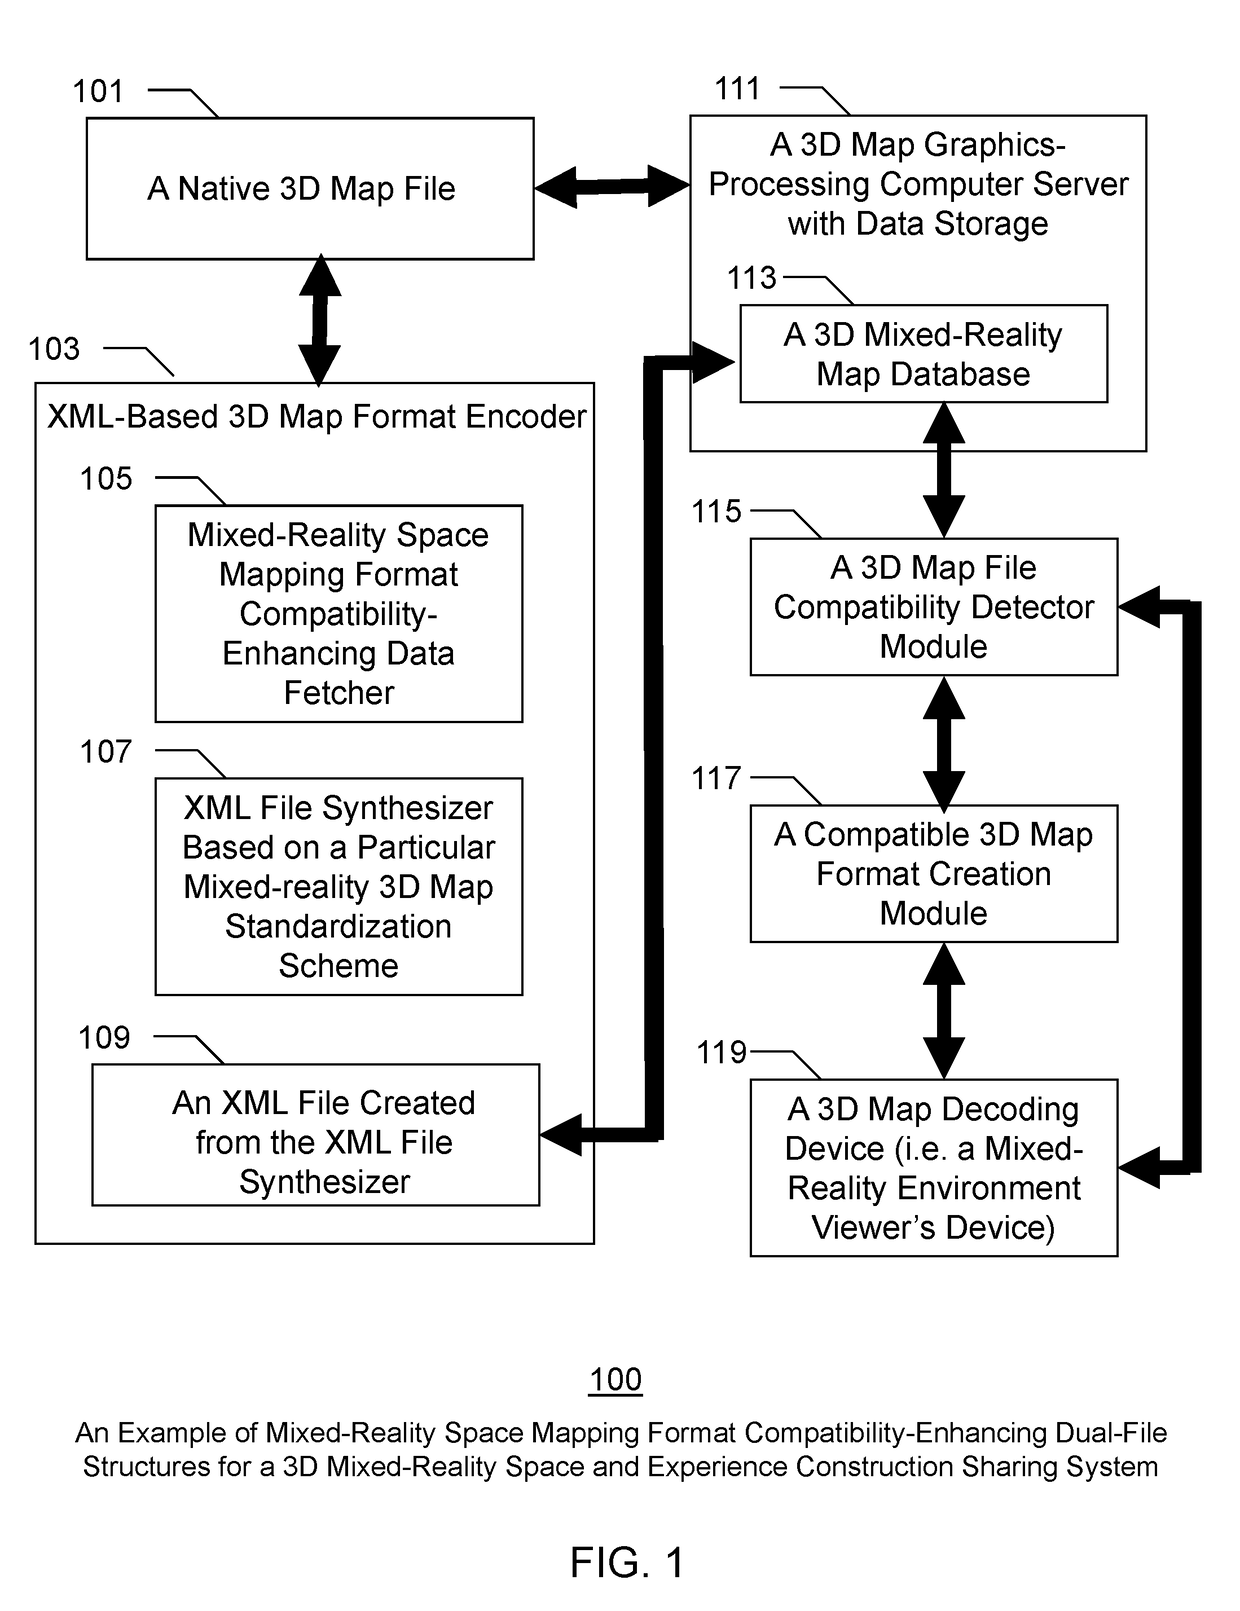 Mixed-Reality Space Map Creation and Mapping Format Compatibility-Enhancing Method for a Three-Dimensional Mixed-Reality Space and Experience Construction Sharing System